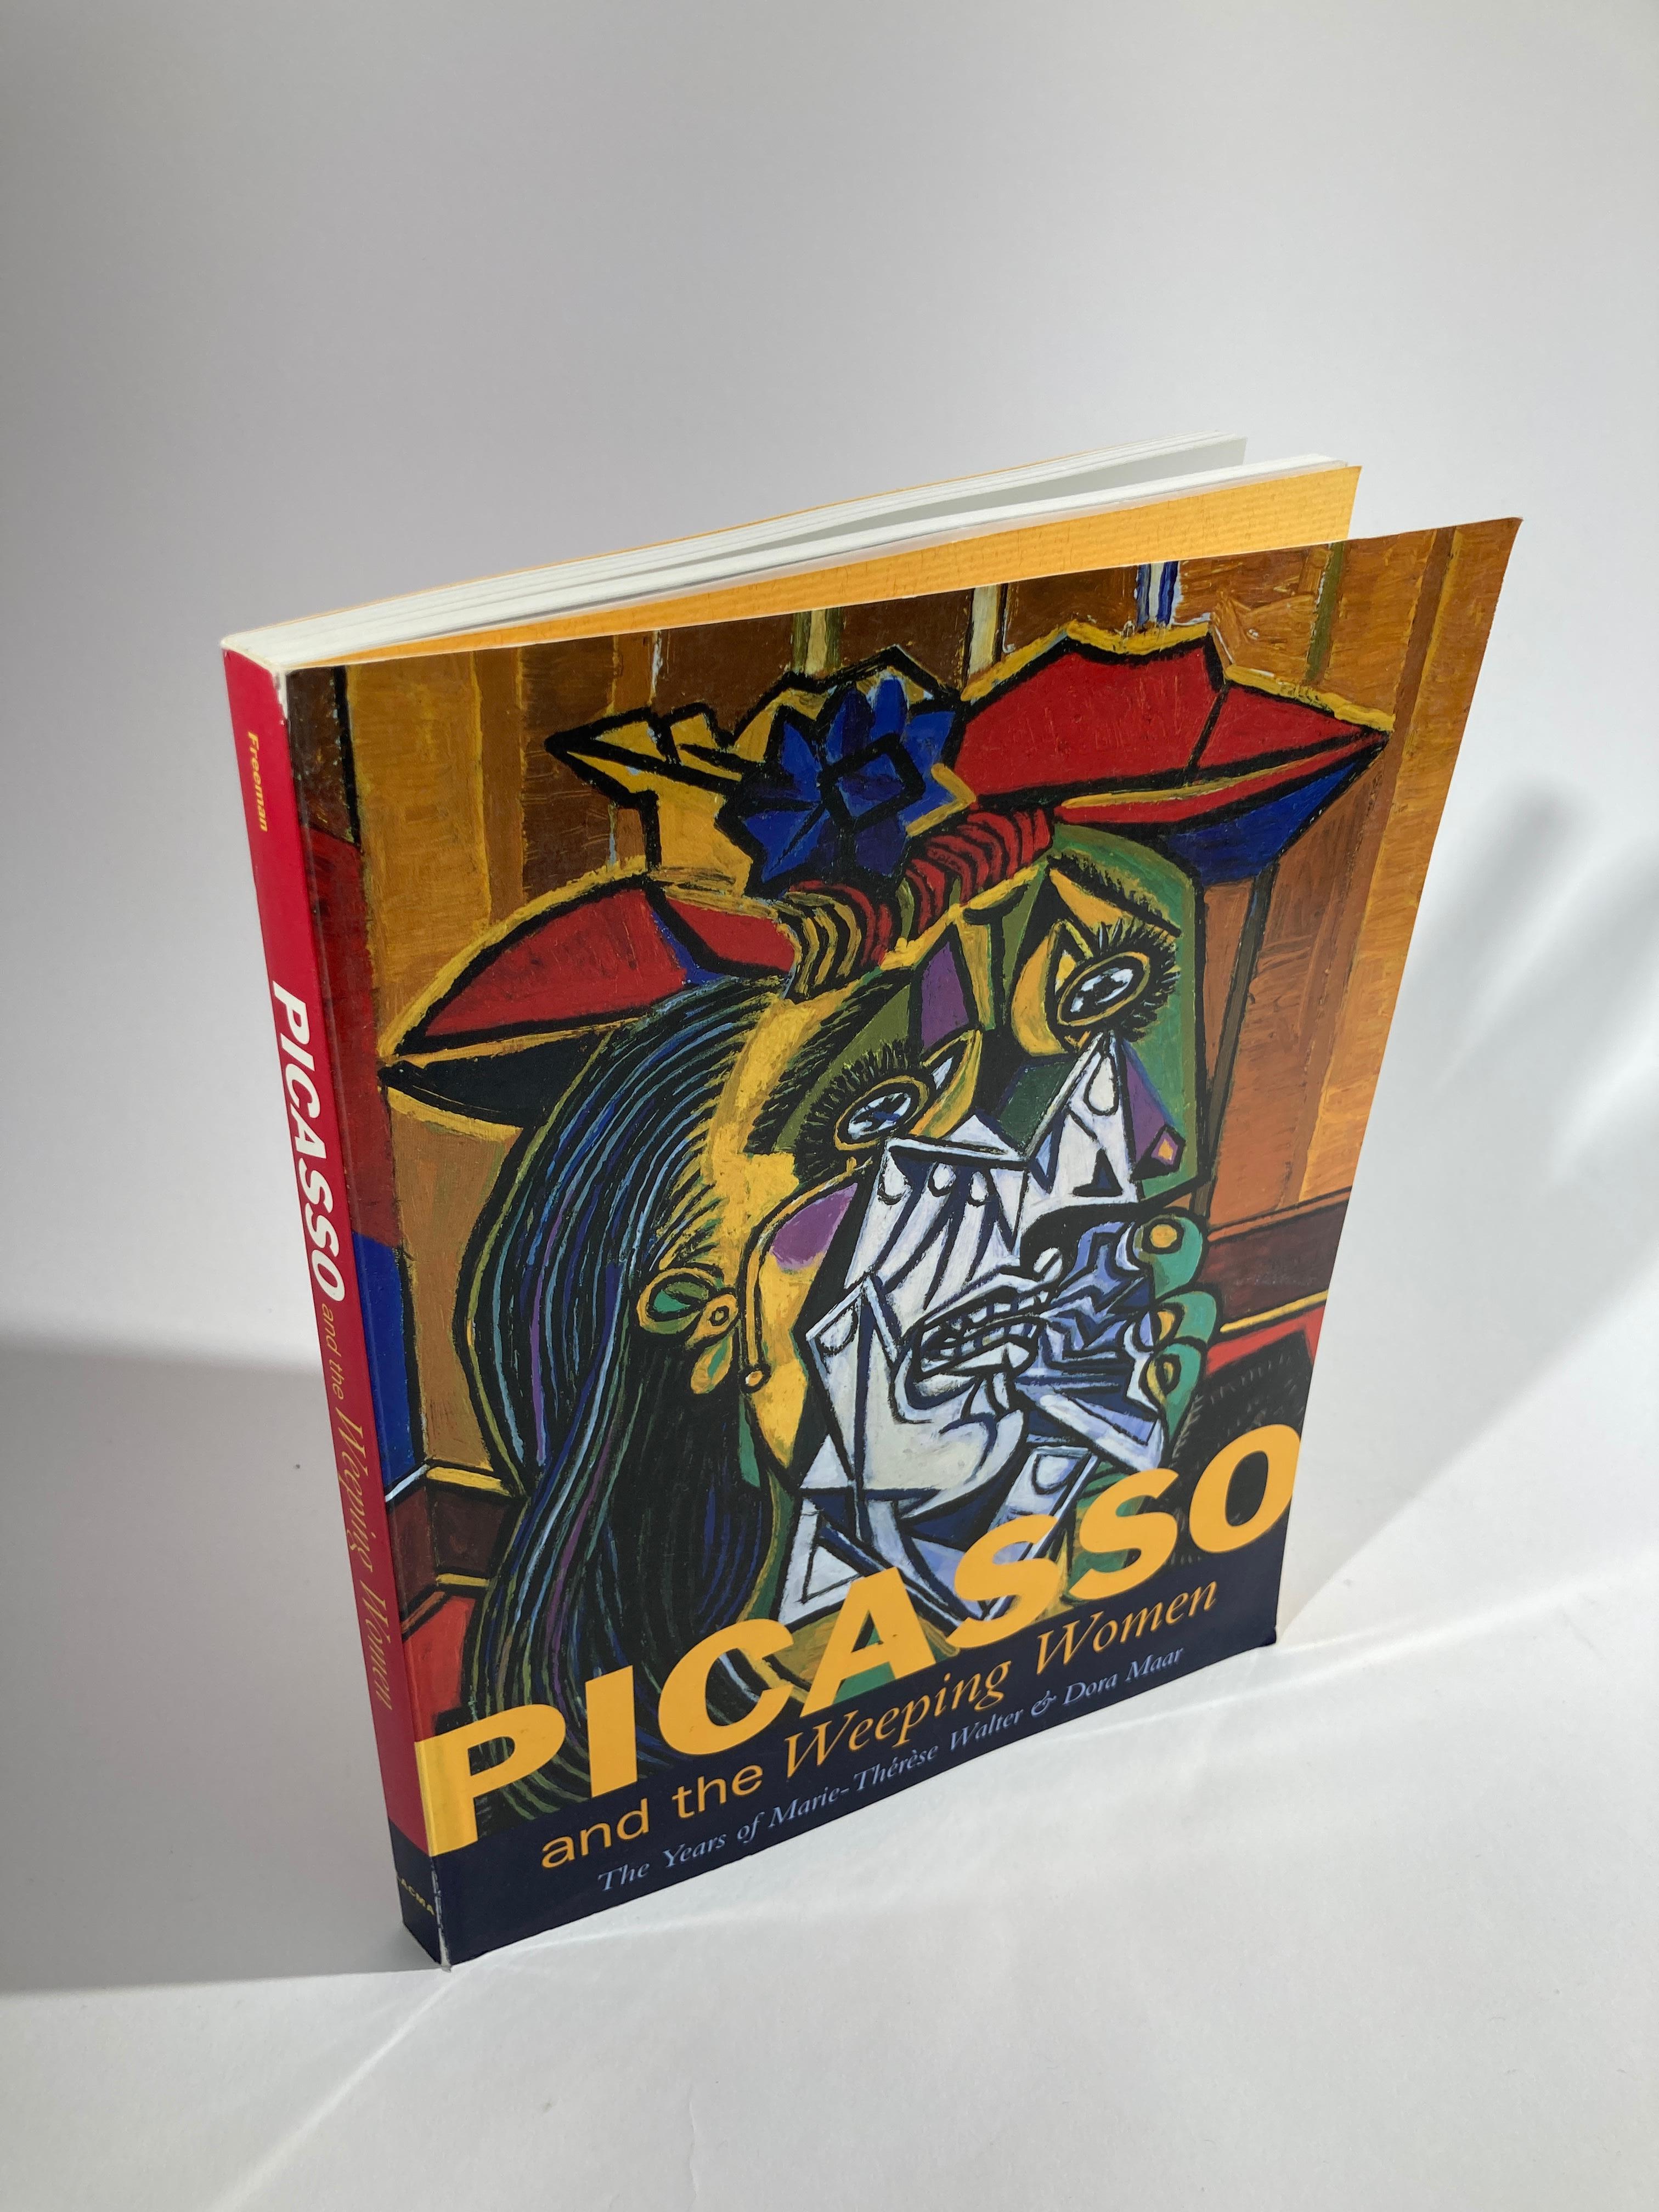 American Picasso and the Weeping Women, the Years of Marie-Therese & Dora Maar Art Book For Sale